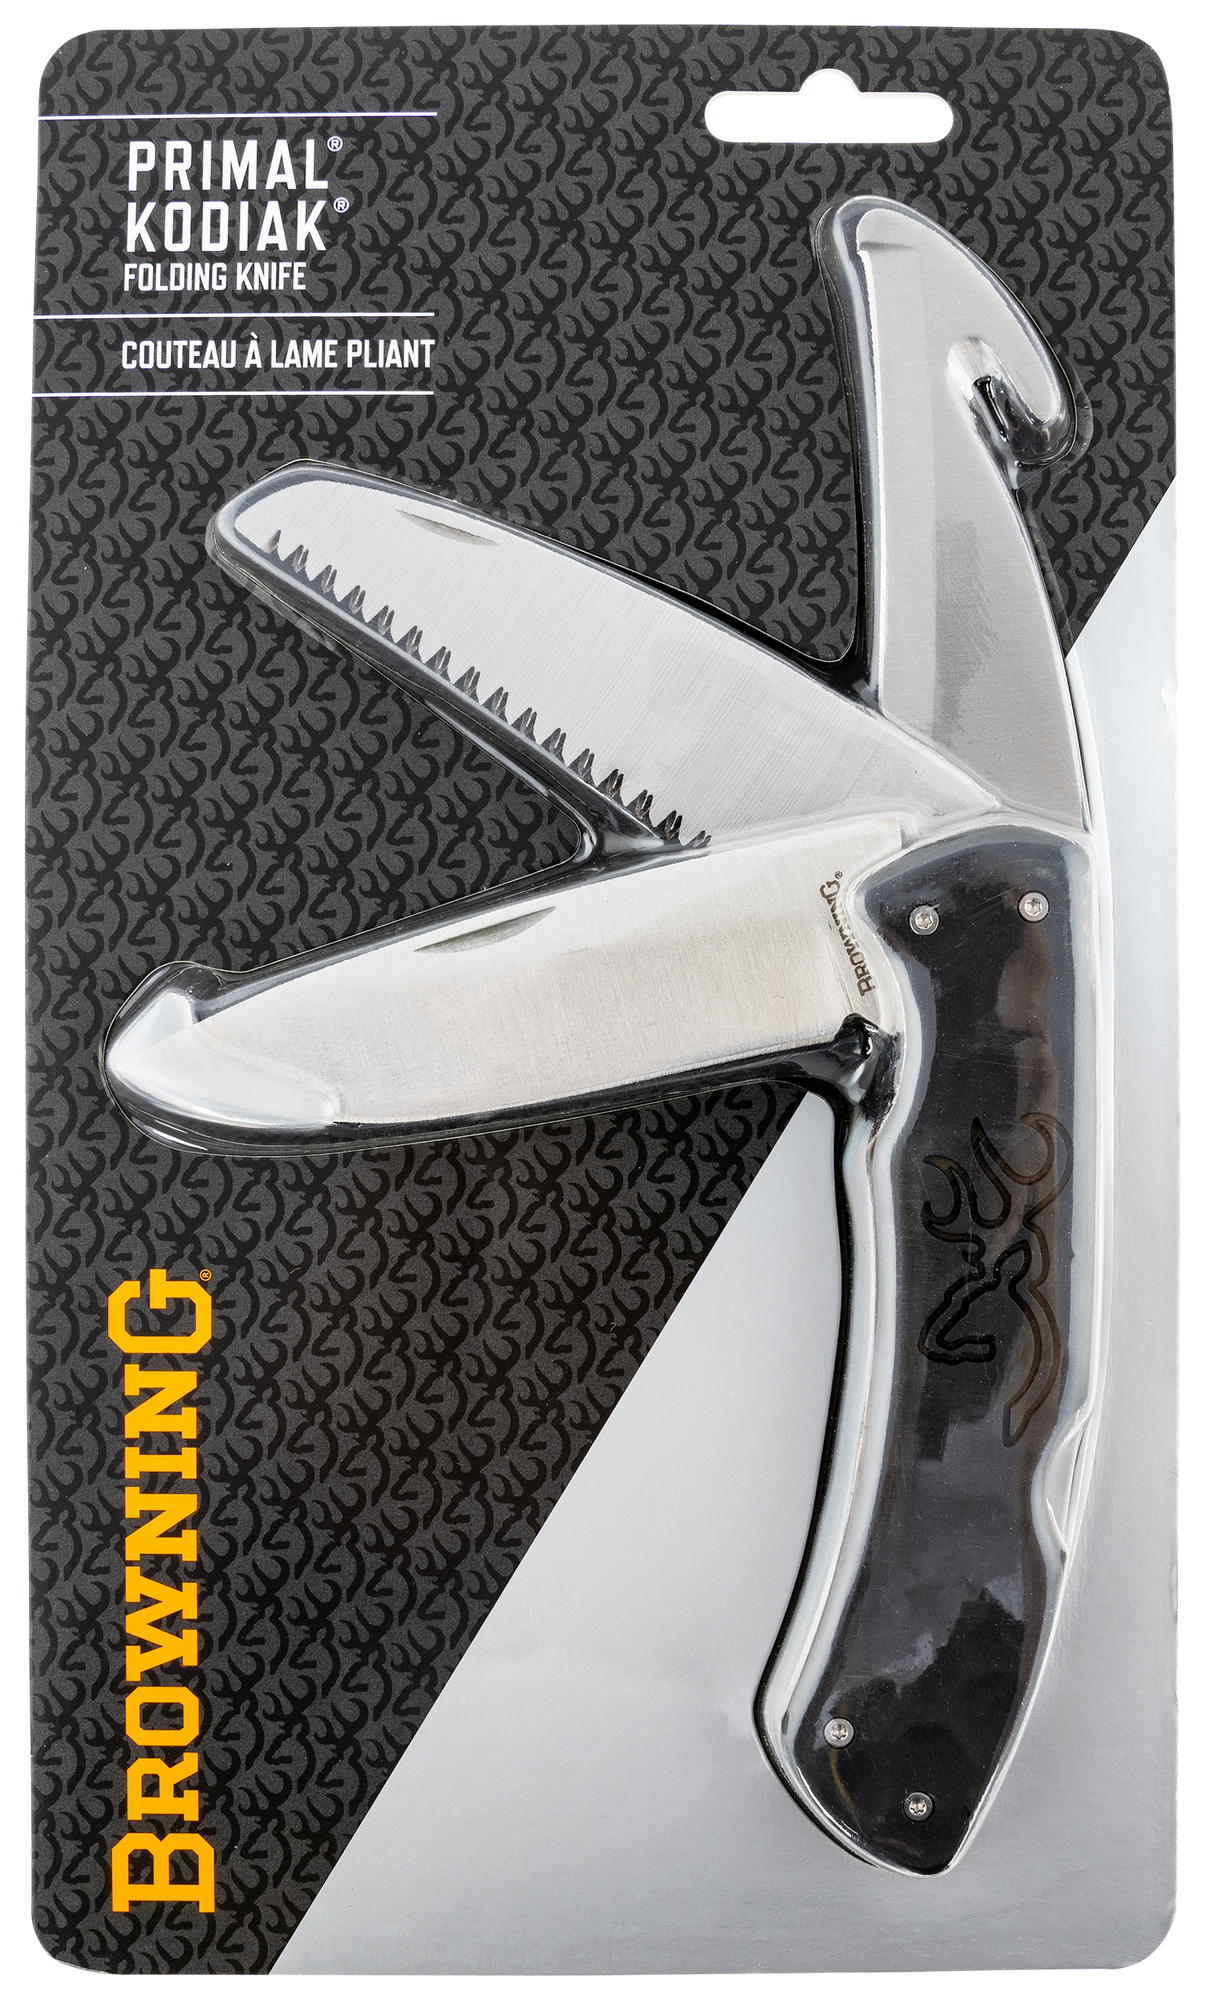 Browning 3220430 Primal Kodiak Slim 3.75" Folding Drop Point/Gut Hook/Saw 8Cr13MoV SS Blade Black Polymer w/Rubber Overmold Handle Includes Nylon Belt Pouch